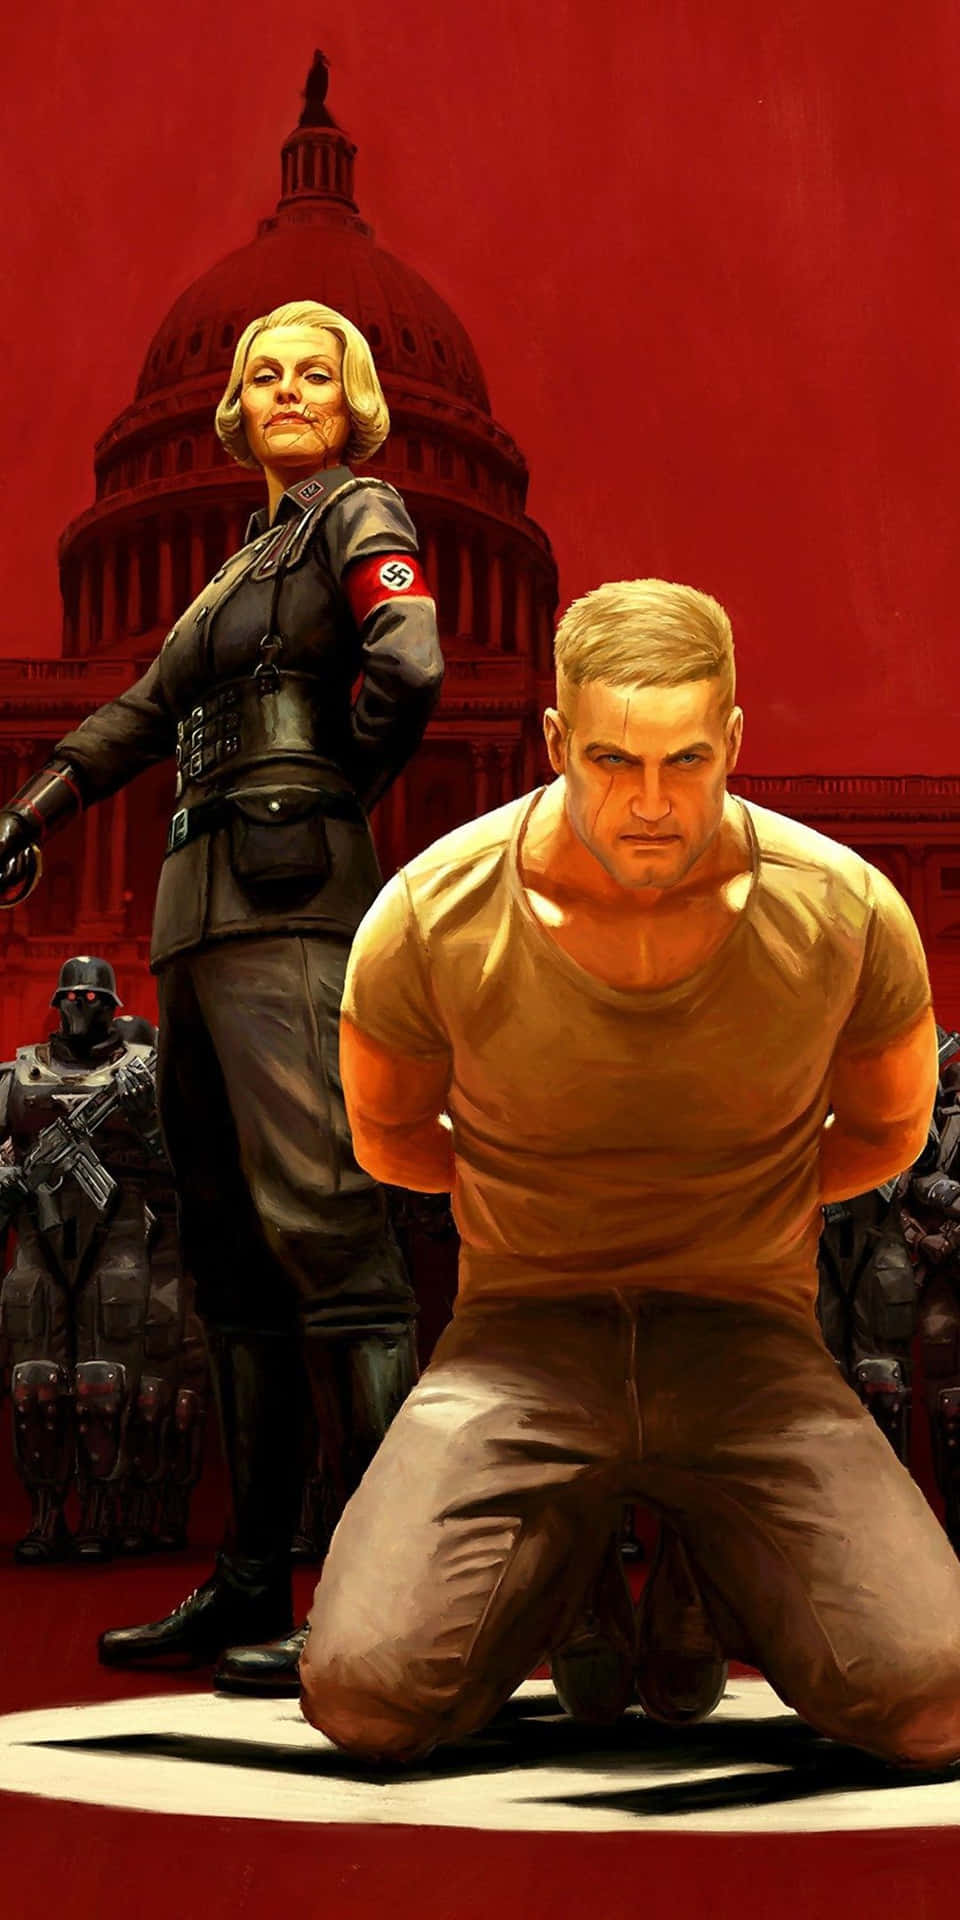 Arm yourself with the Pixel 3, and engage in the excitement of Wolfenstein II: The New Colossus